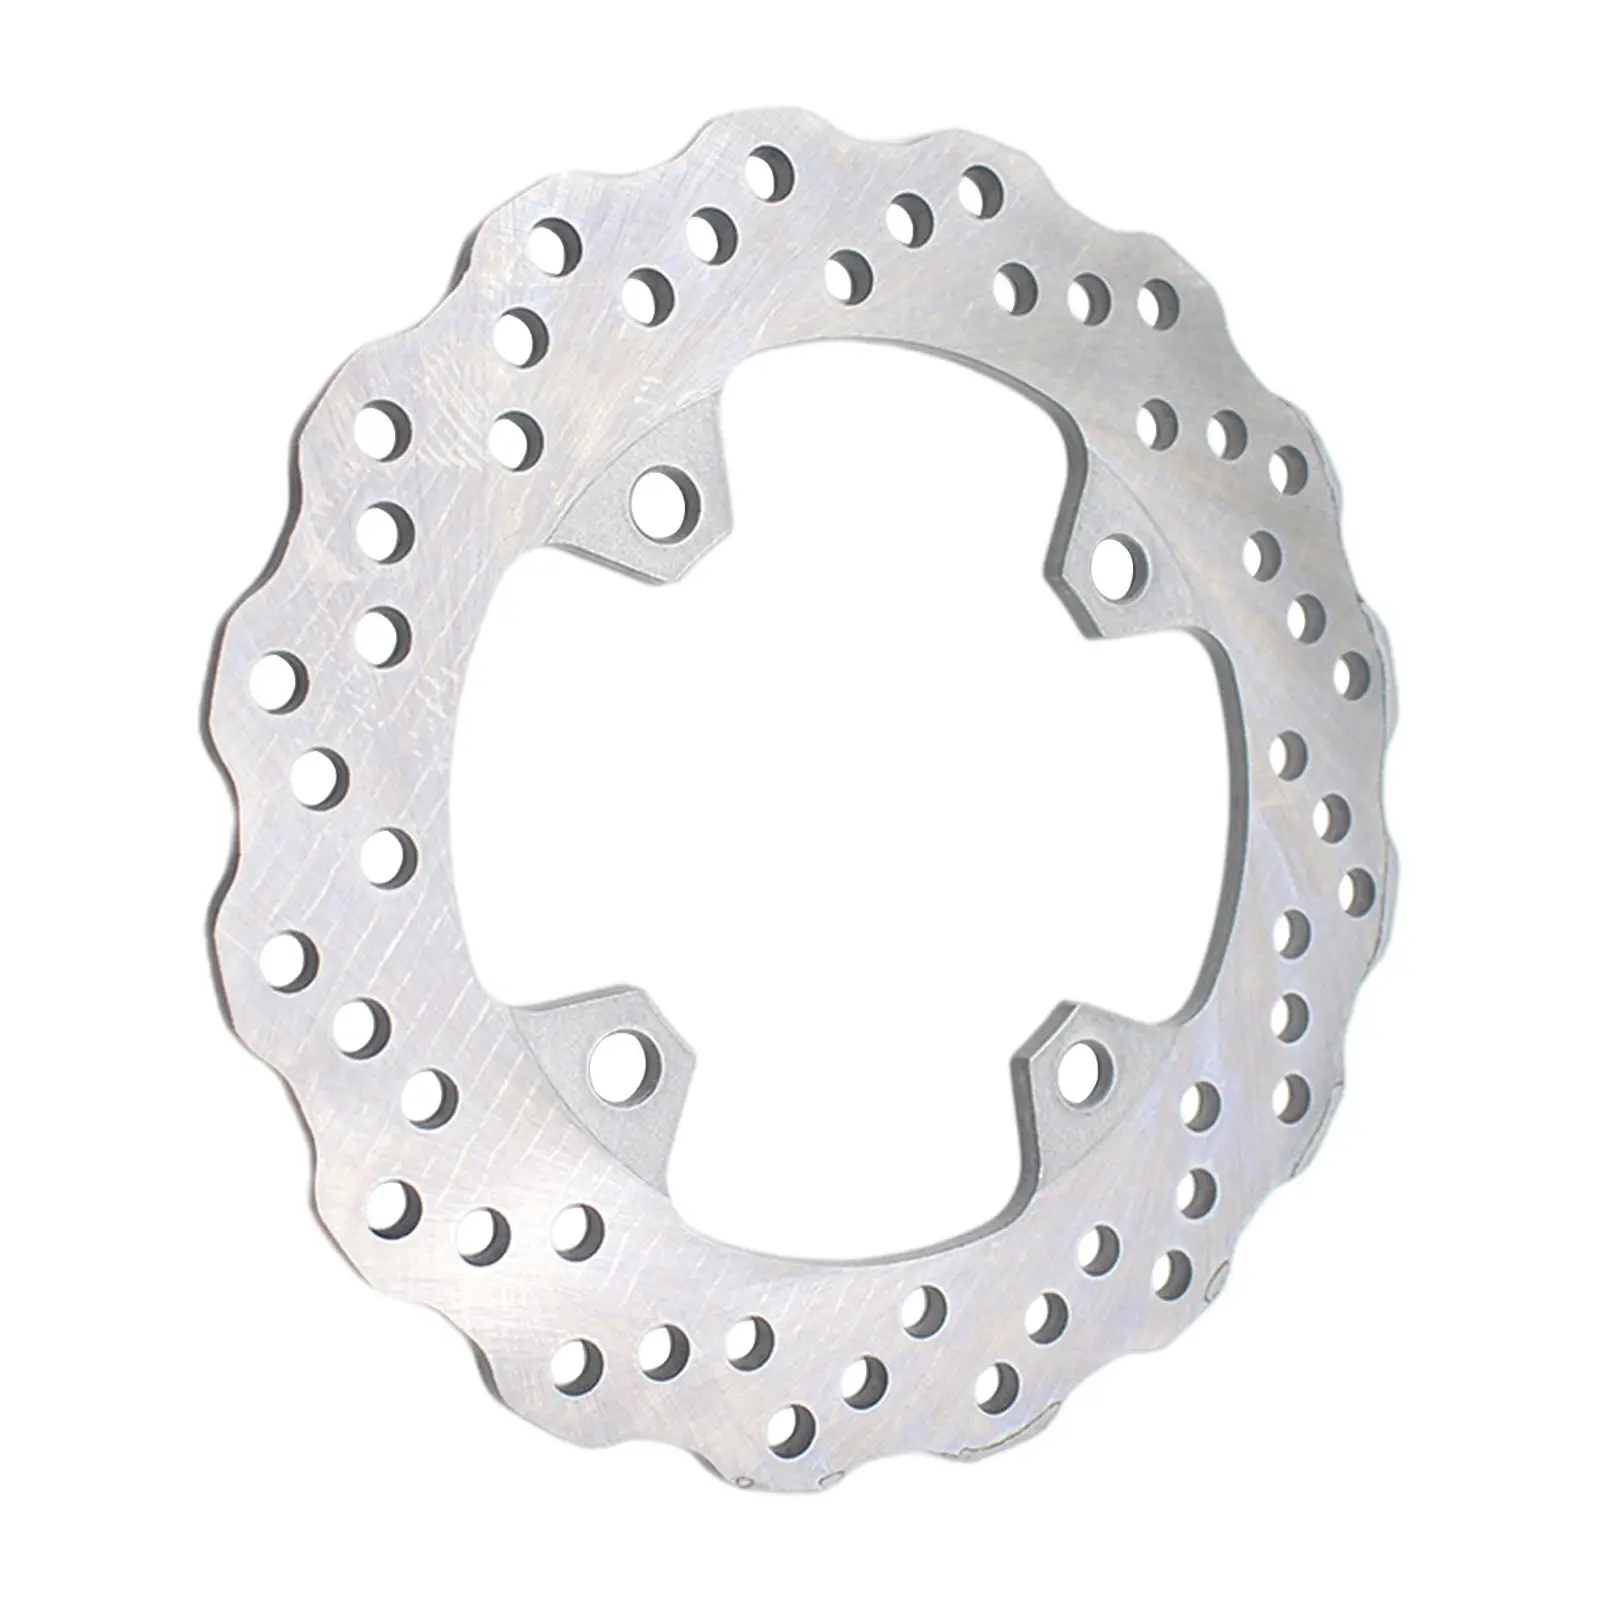 Rear Brake Disc Rotor Motorcycle Replacement Steel Fit for Kawasaki ZX6R ZX636 ZX-9R ZX9R